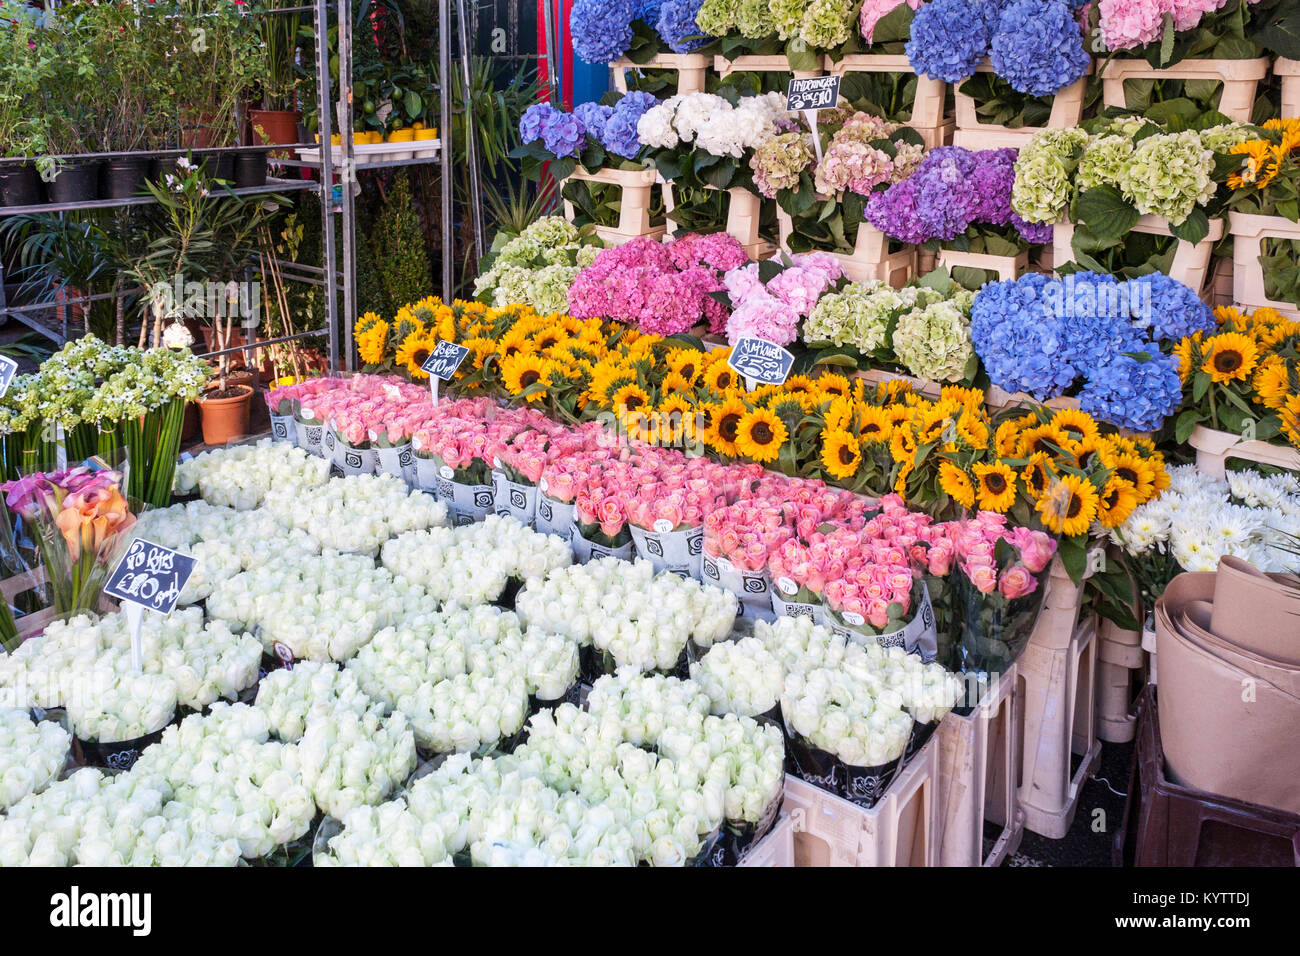 Columbia Road Flower Market Stall Without People, Columbia Rd, Londra, Inghilterra, GB, Regno Unito Foto Stock